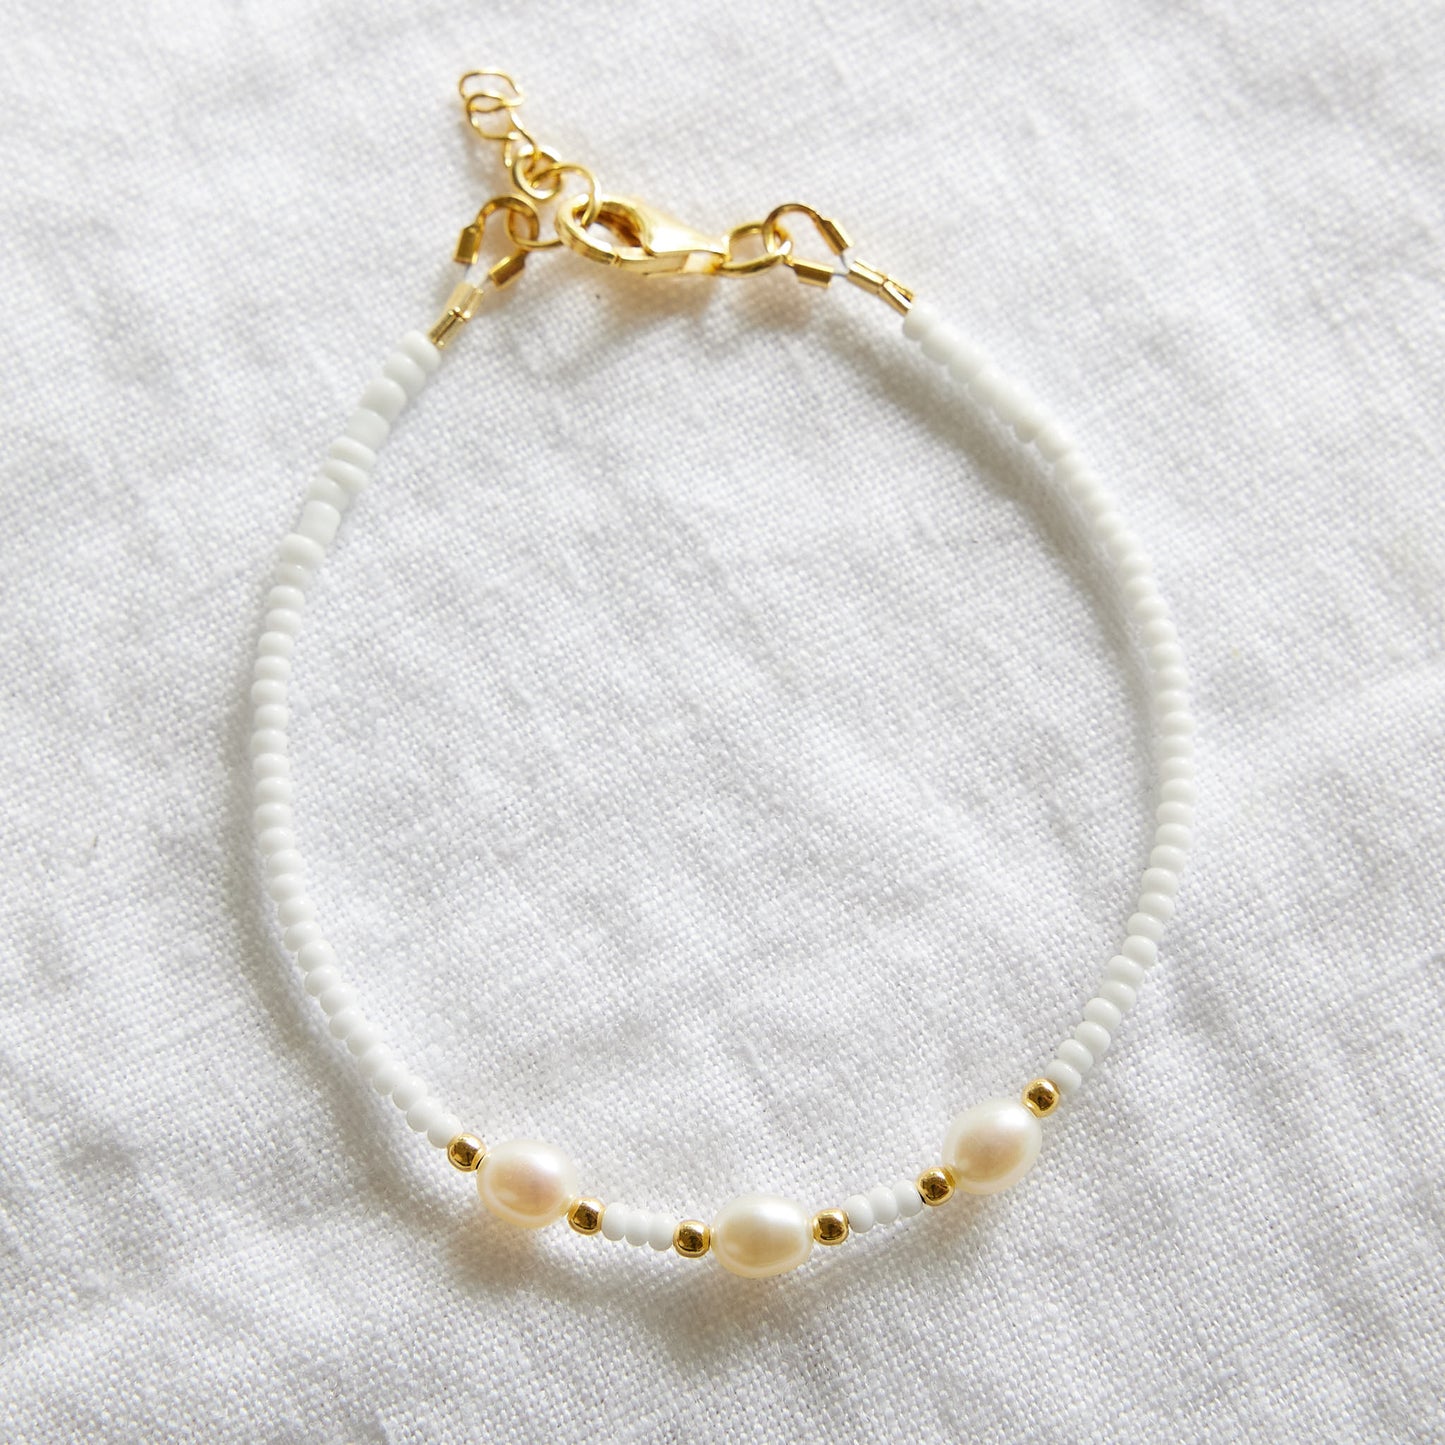 White glass bracelet with freshwater cultured pearls